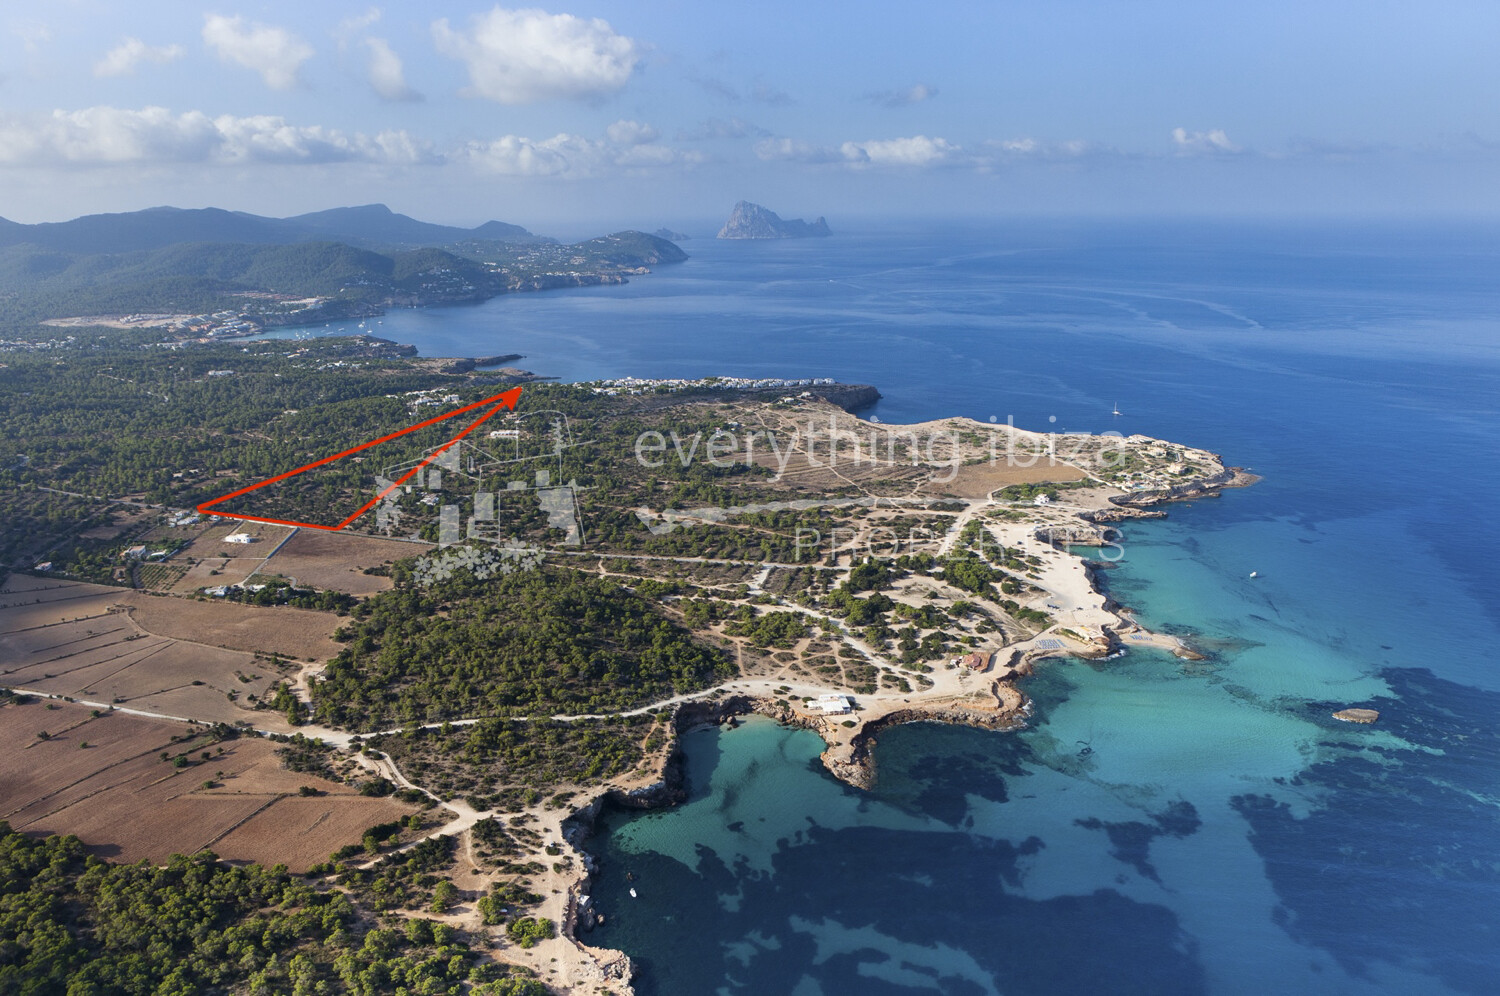 Super Large 70.000m2 Plot of Prime Constructable Land Close to Cala Conta, ref. 1699, for sale in Ibiza by everything ibiza Properties